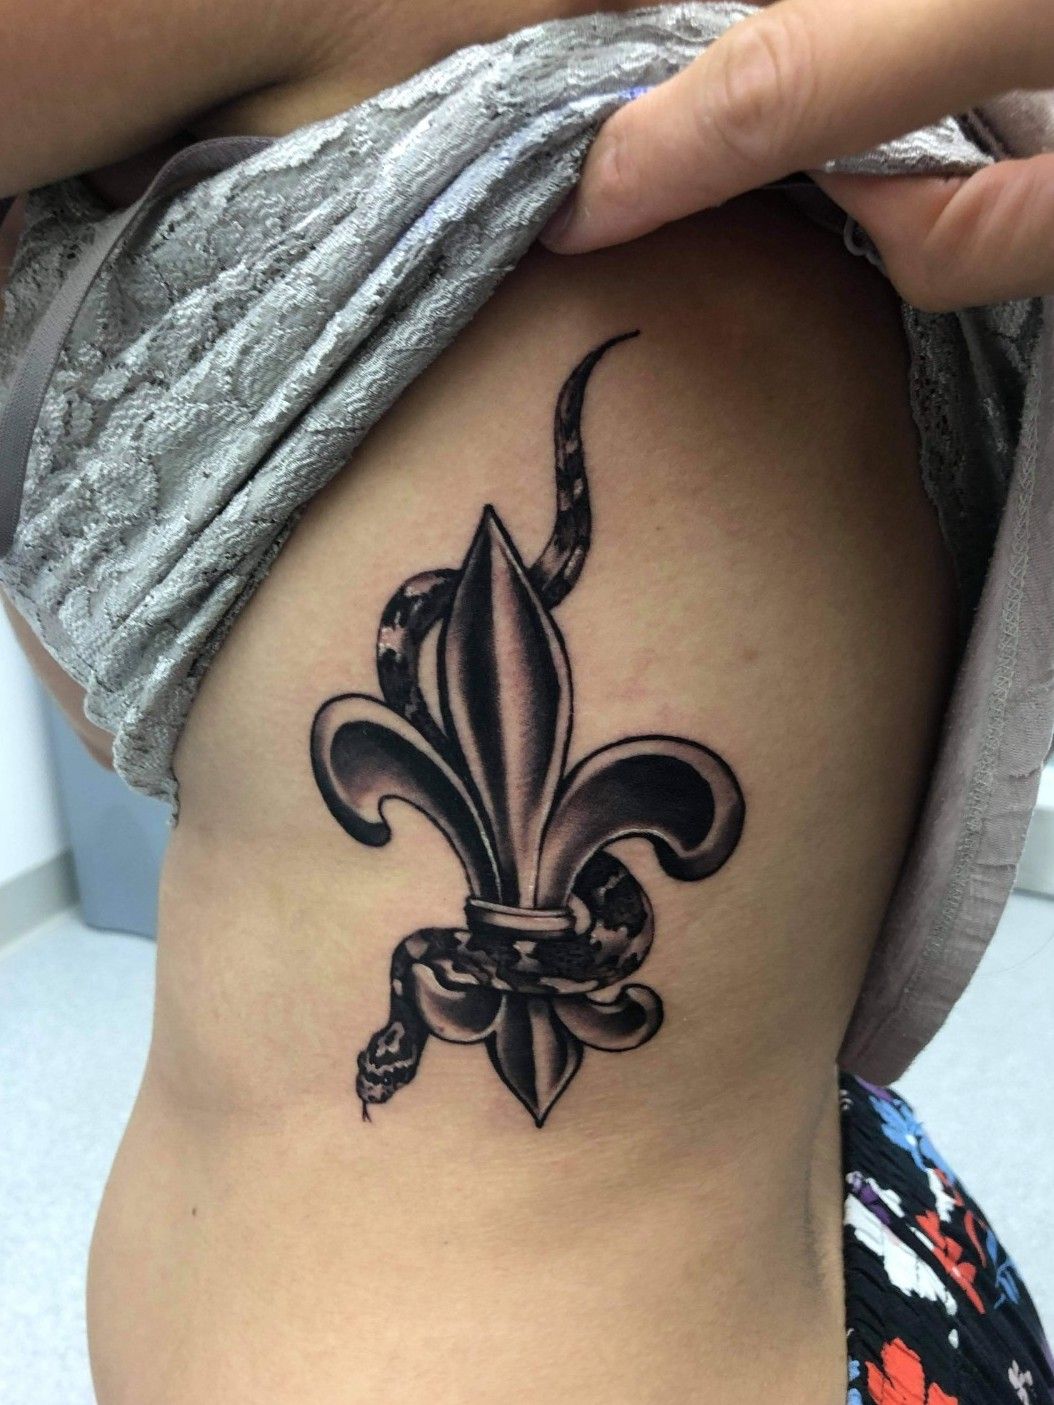 New Orleans Tattoo by SneakyRacoon07 on DeviantArt